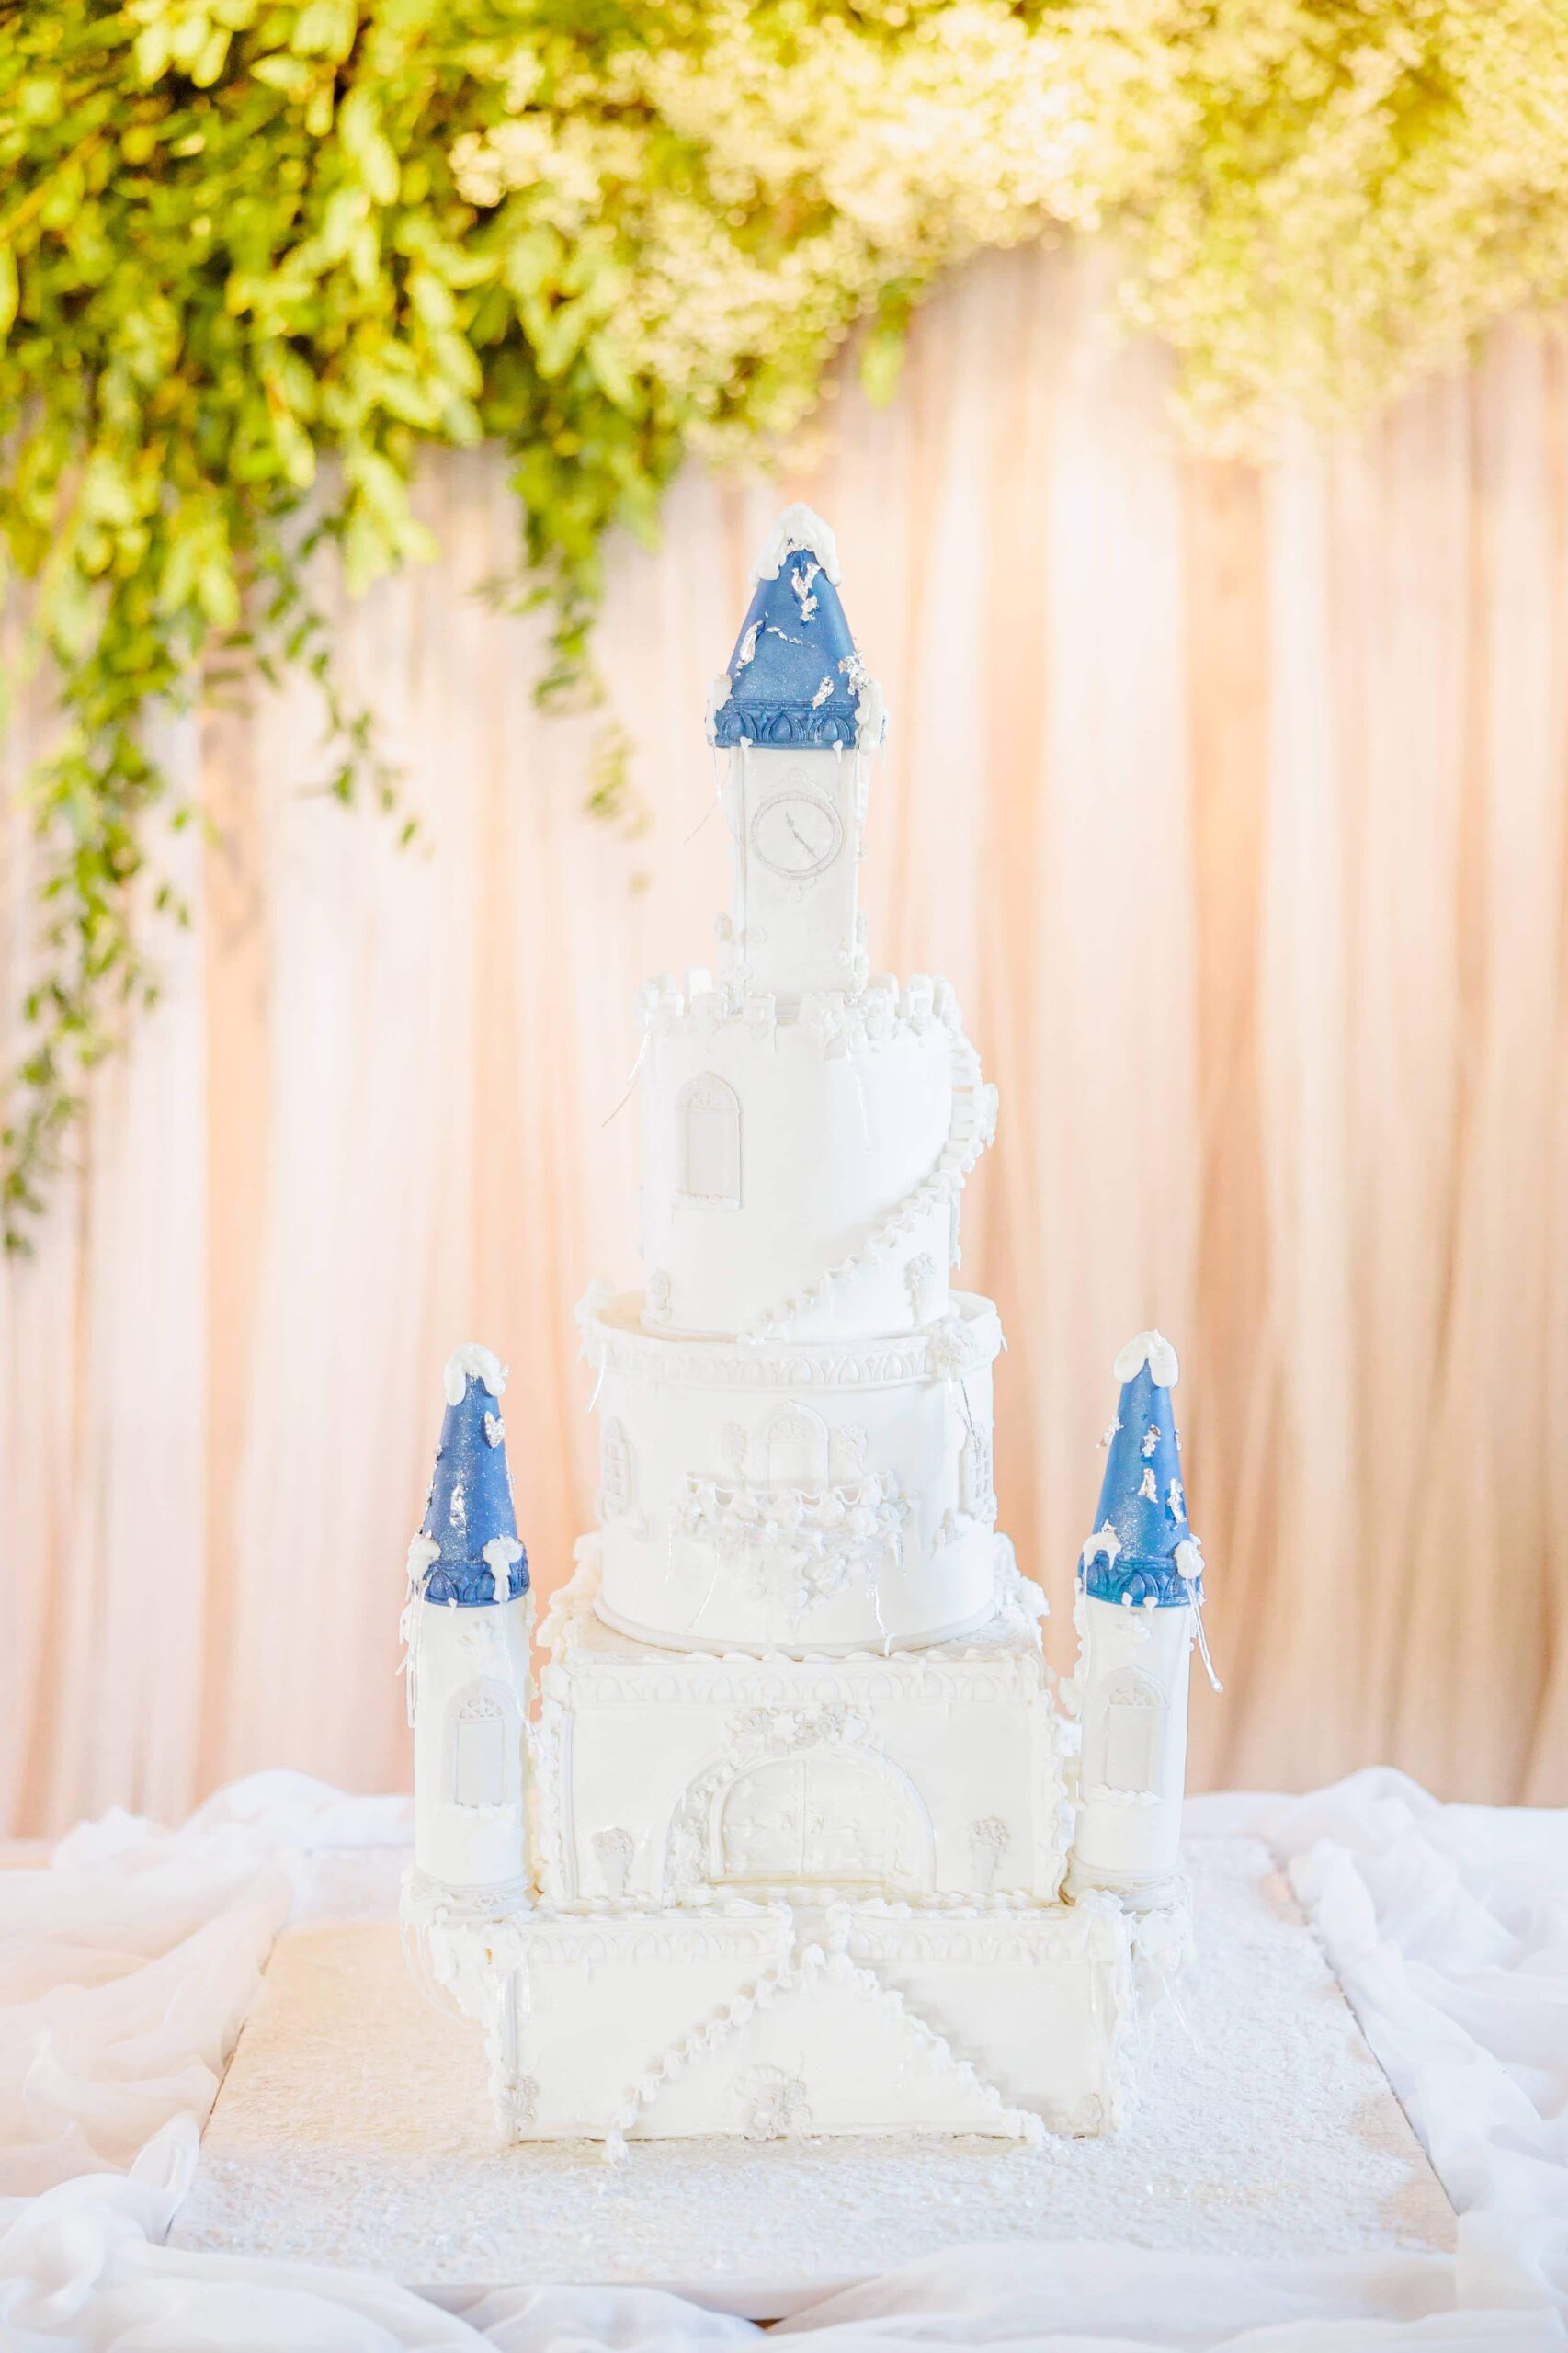 A winter wonderland wedding cake made to look like an icy castle, with turrets and intricate swirl details.